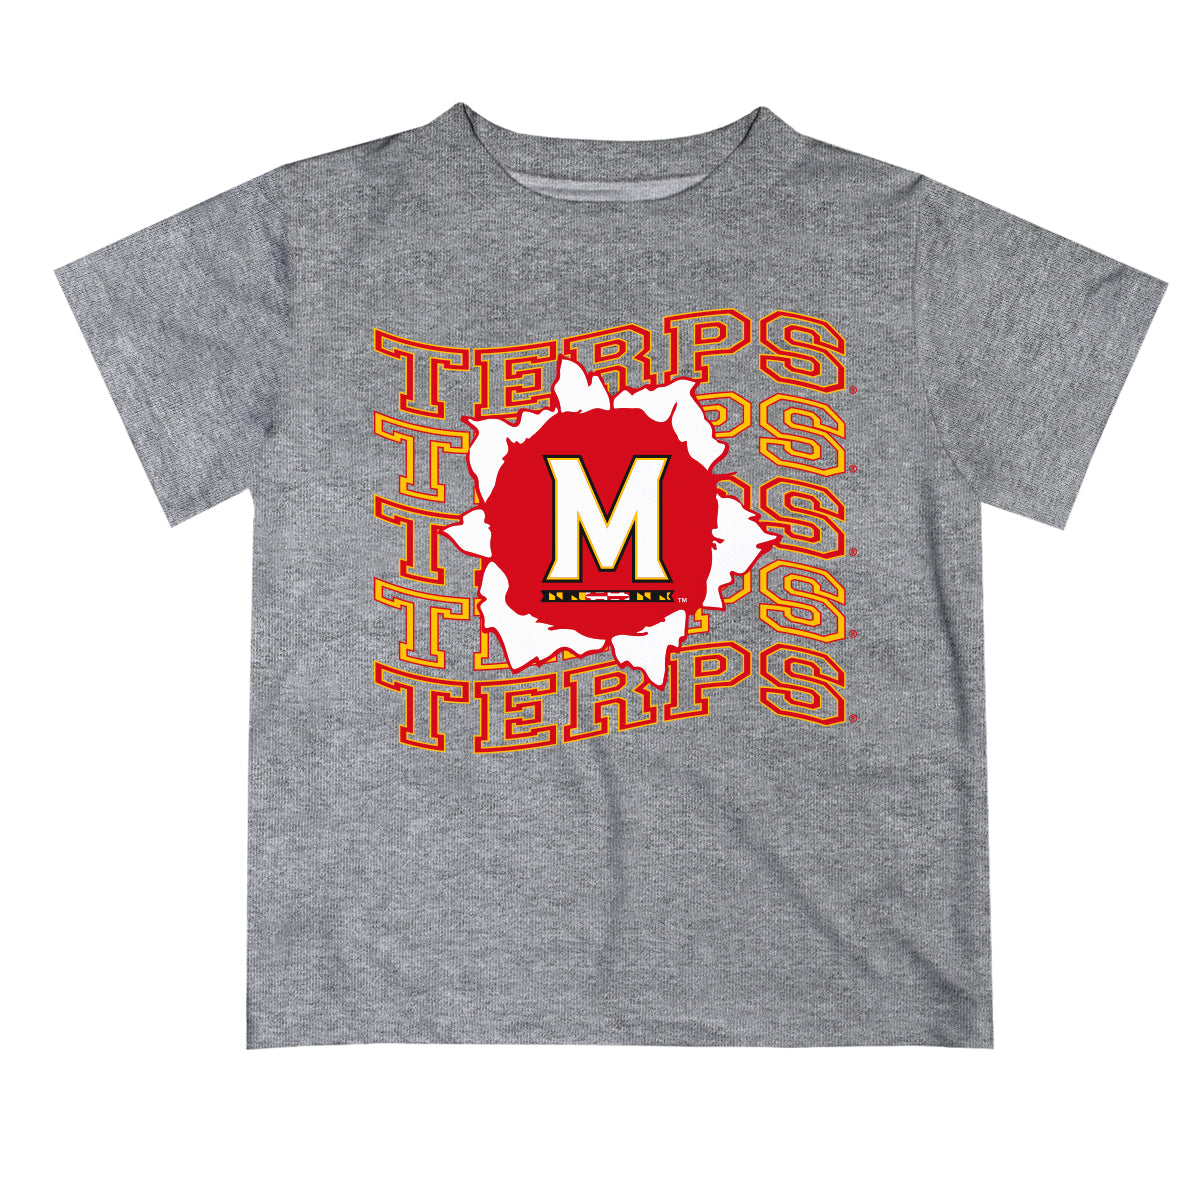 Maryland Terrapins volleyball apparel